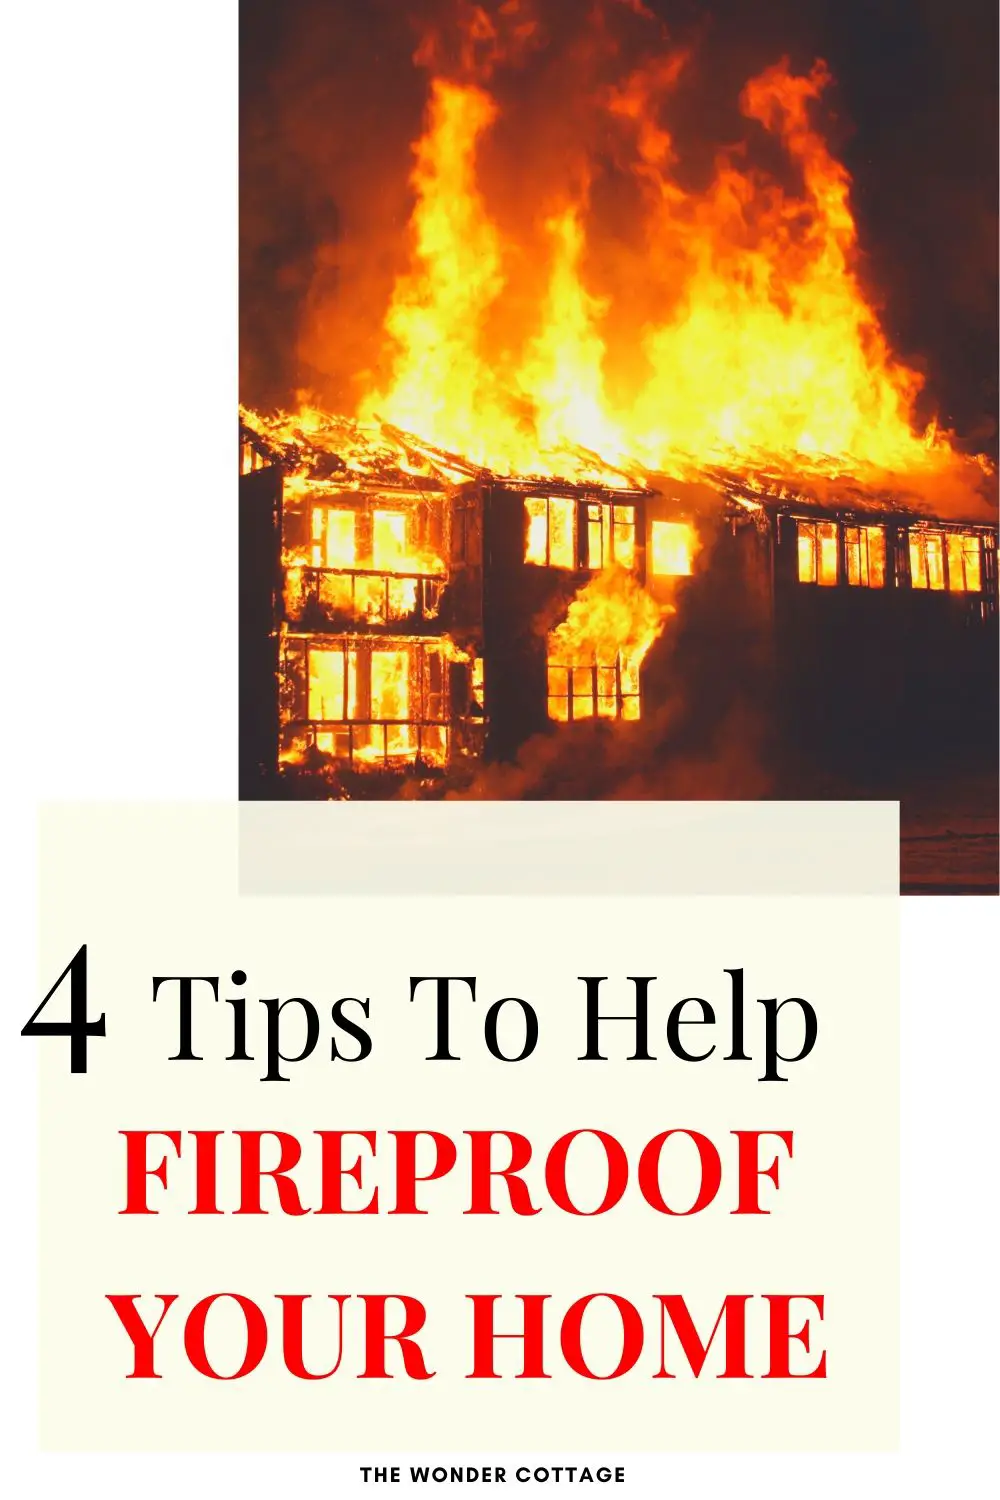 4 tips to help fireproof your home